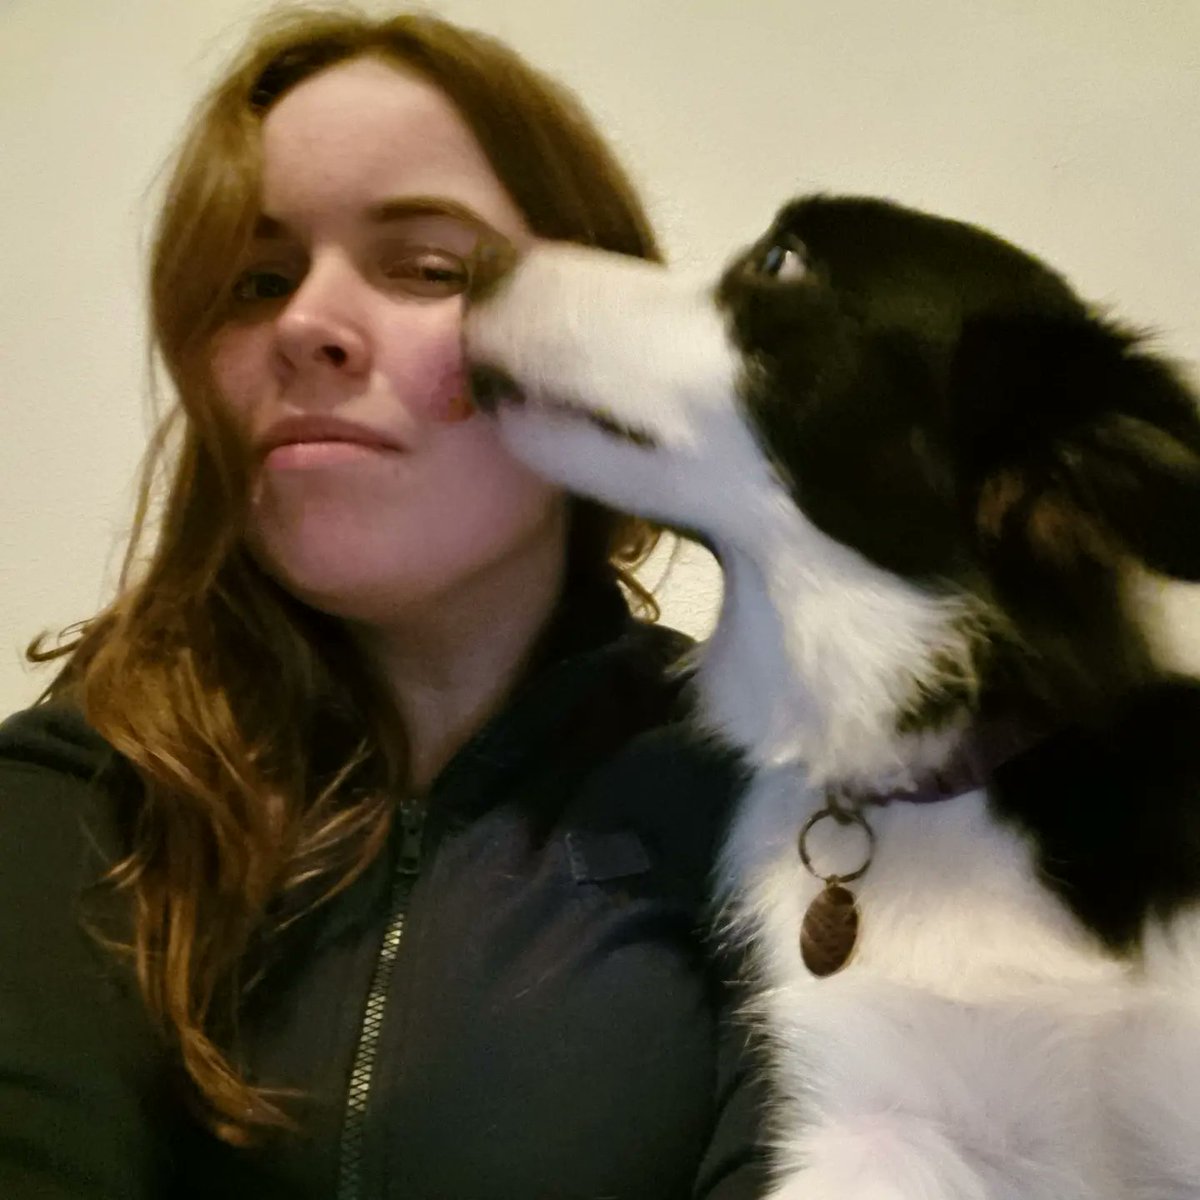 Getting cuddles and kisses from Lola before bedtime last night

#bordercollie #bordercolliepuppy #lola #herdingdog #bordercollielife #bordercollielove #bedtime #cuddlesandkissesfromlola #lovemygirl